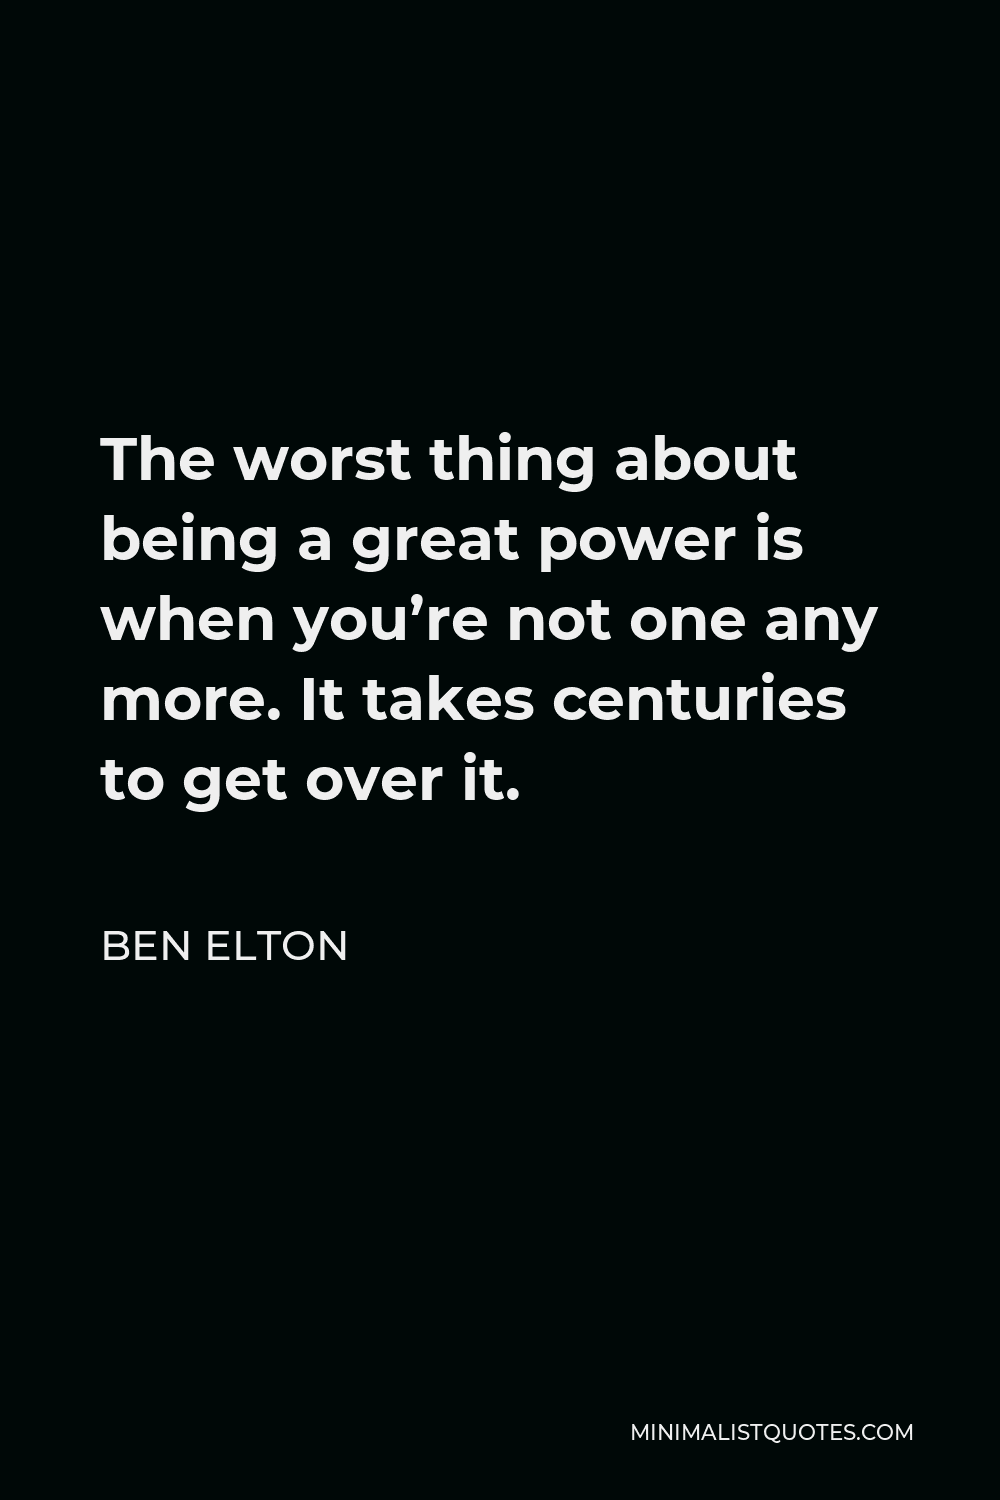 Ben Elton Quote - The worst thing about being a great power is when you’re not one any more. It takes centuries to get over it.